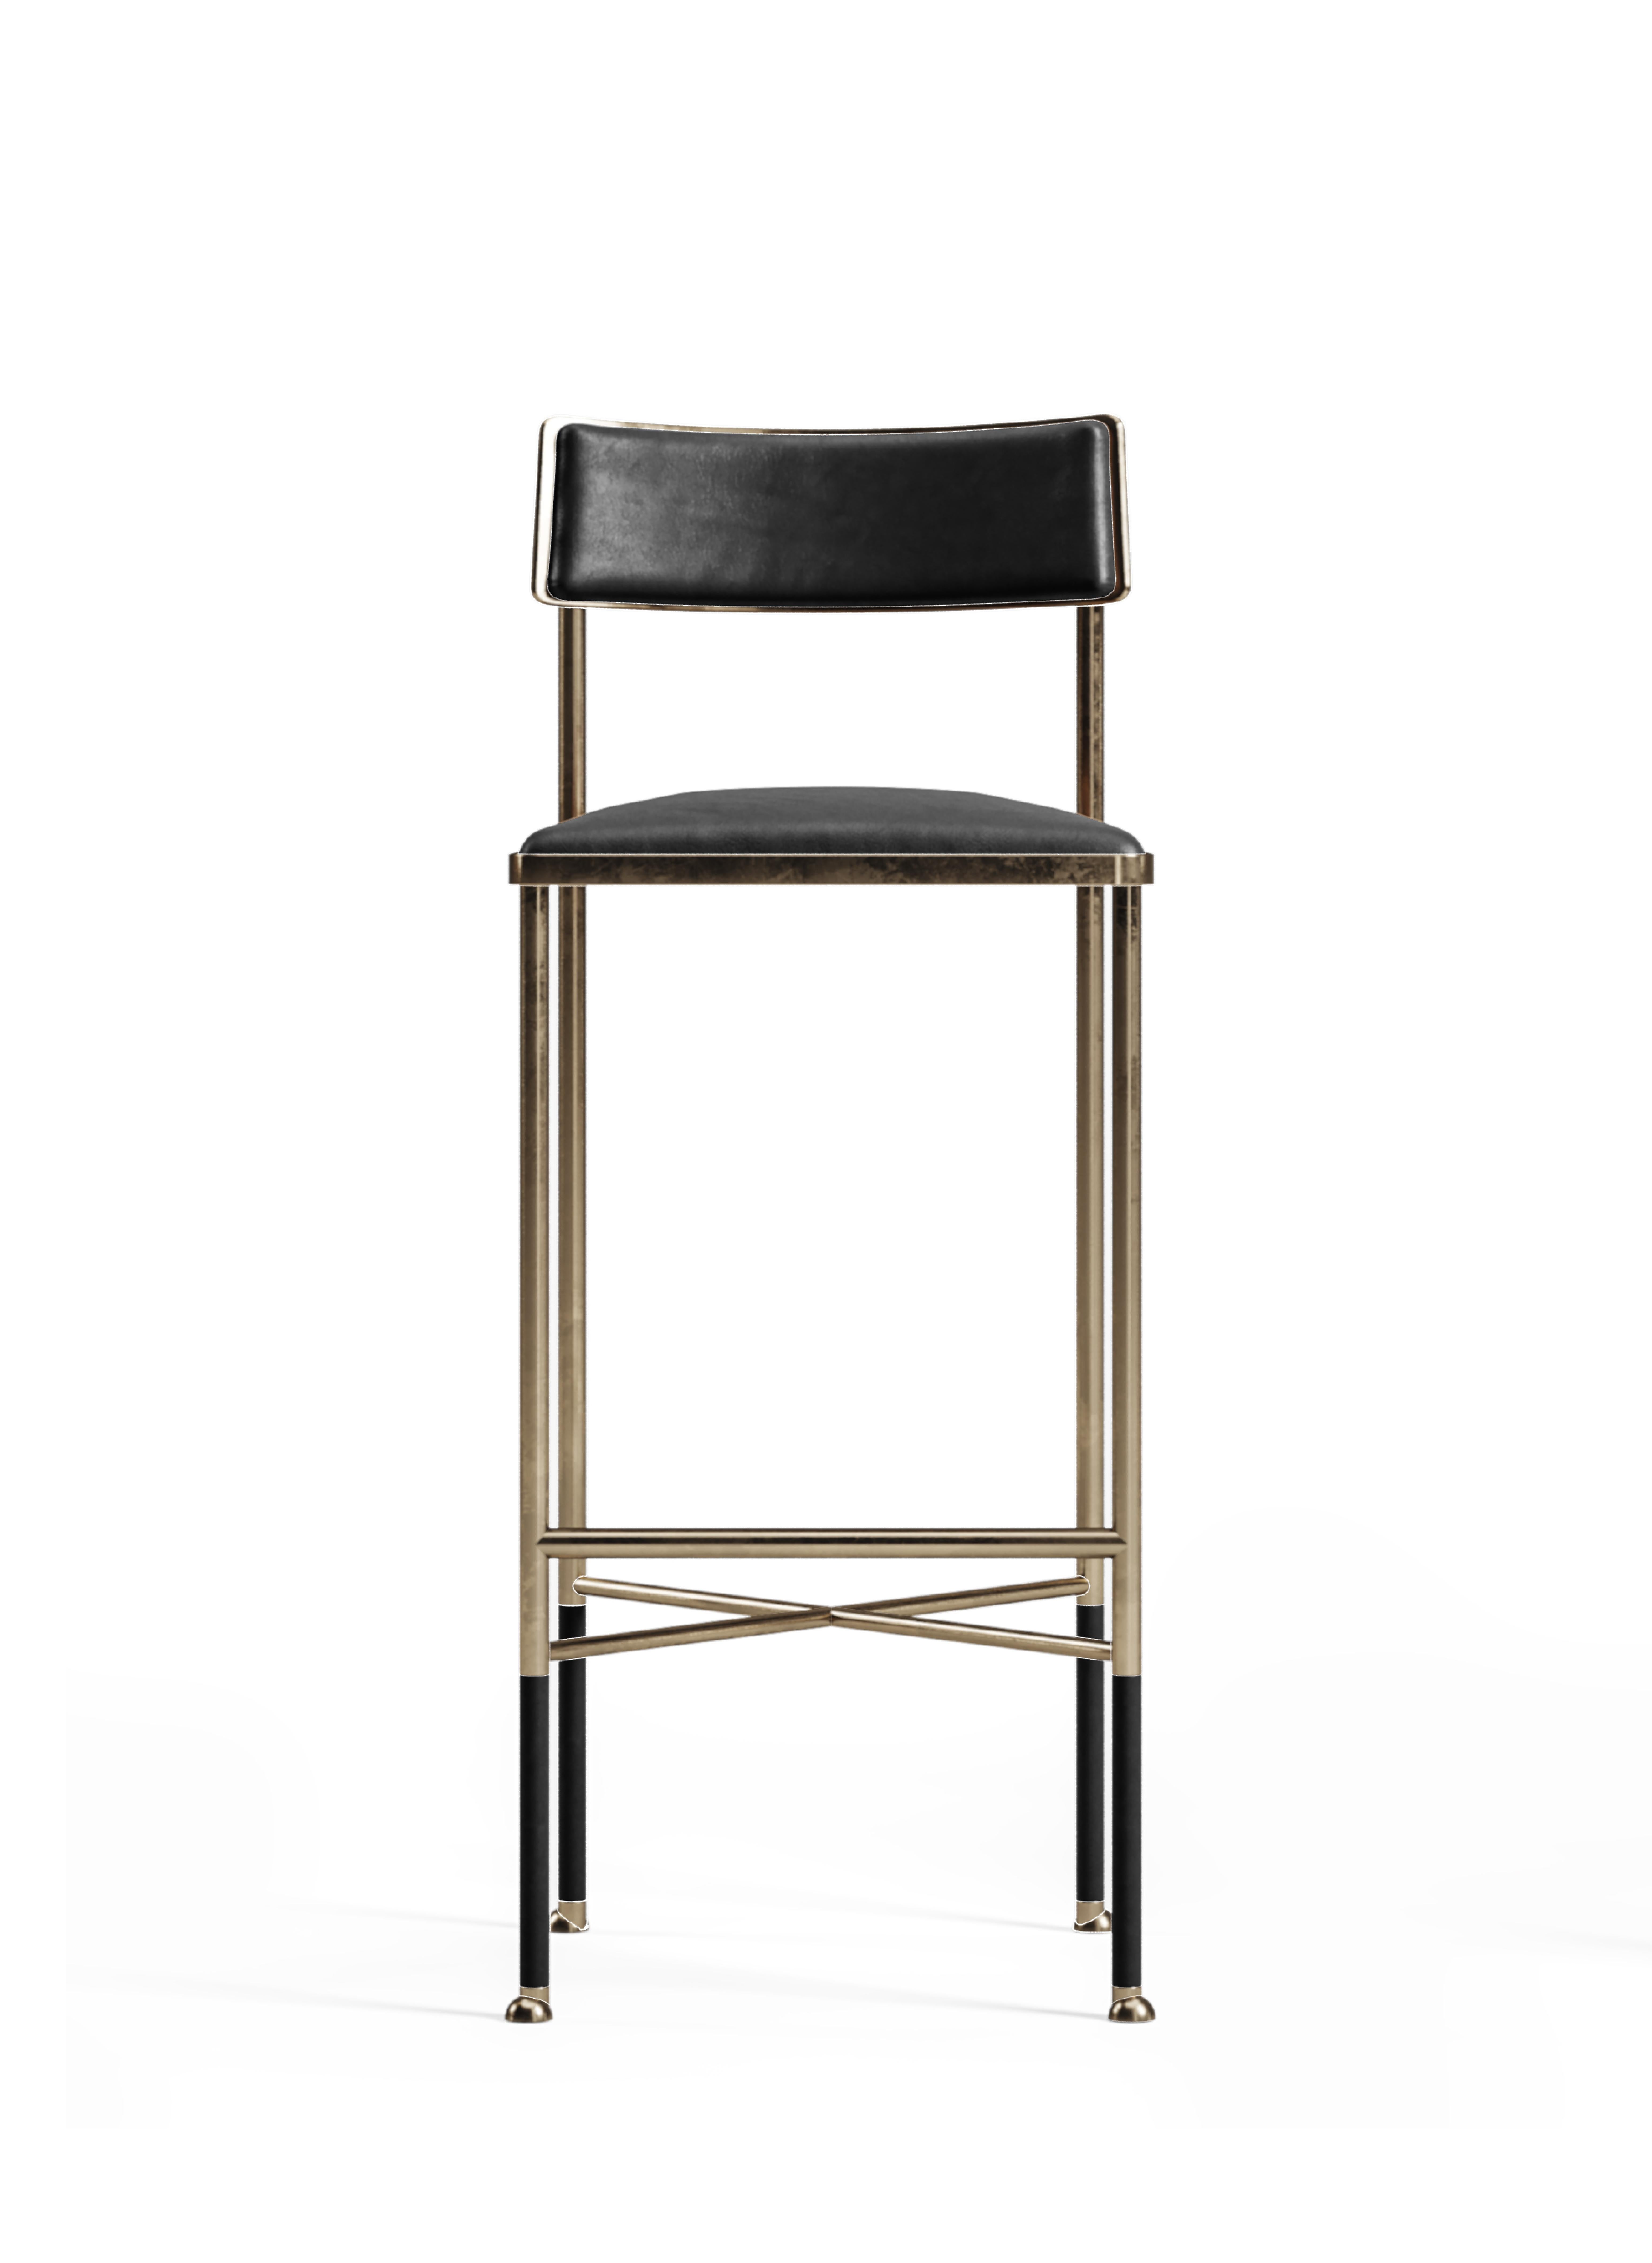 American Bar Stool: Sit Up For Sale